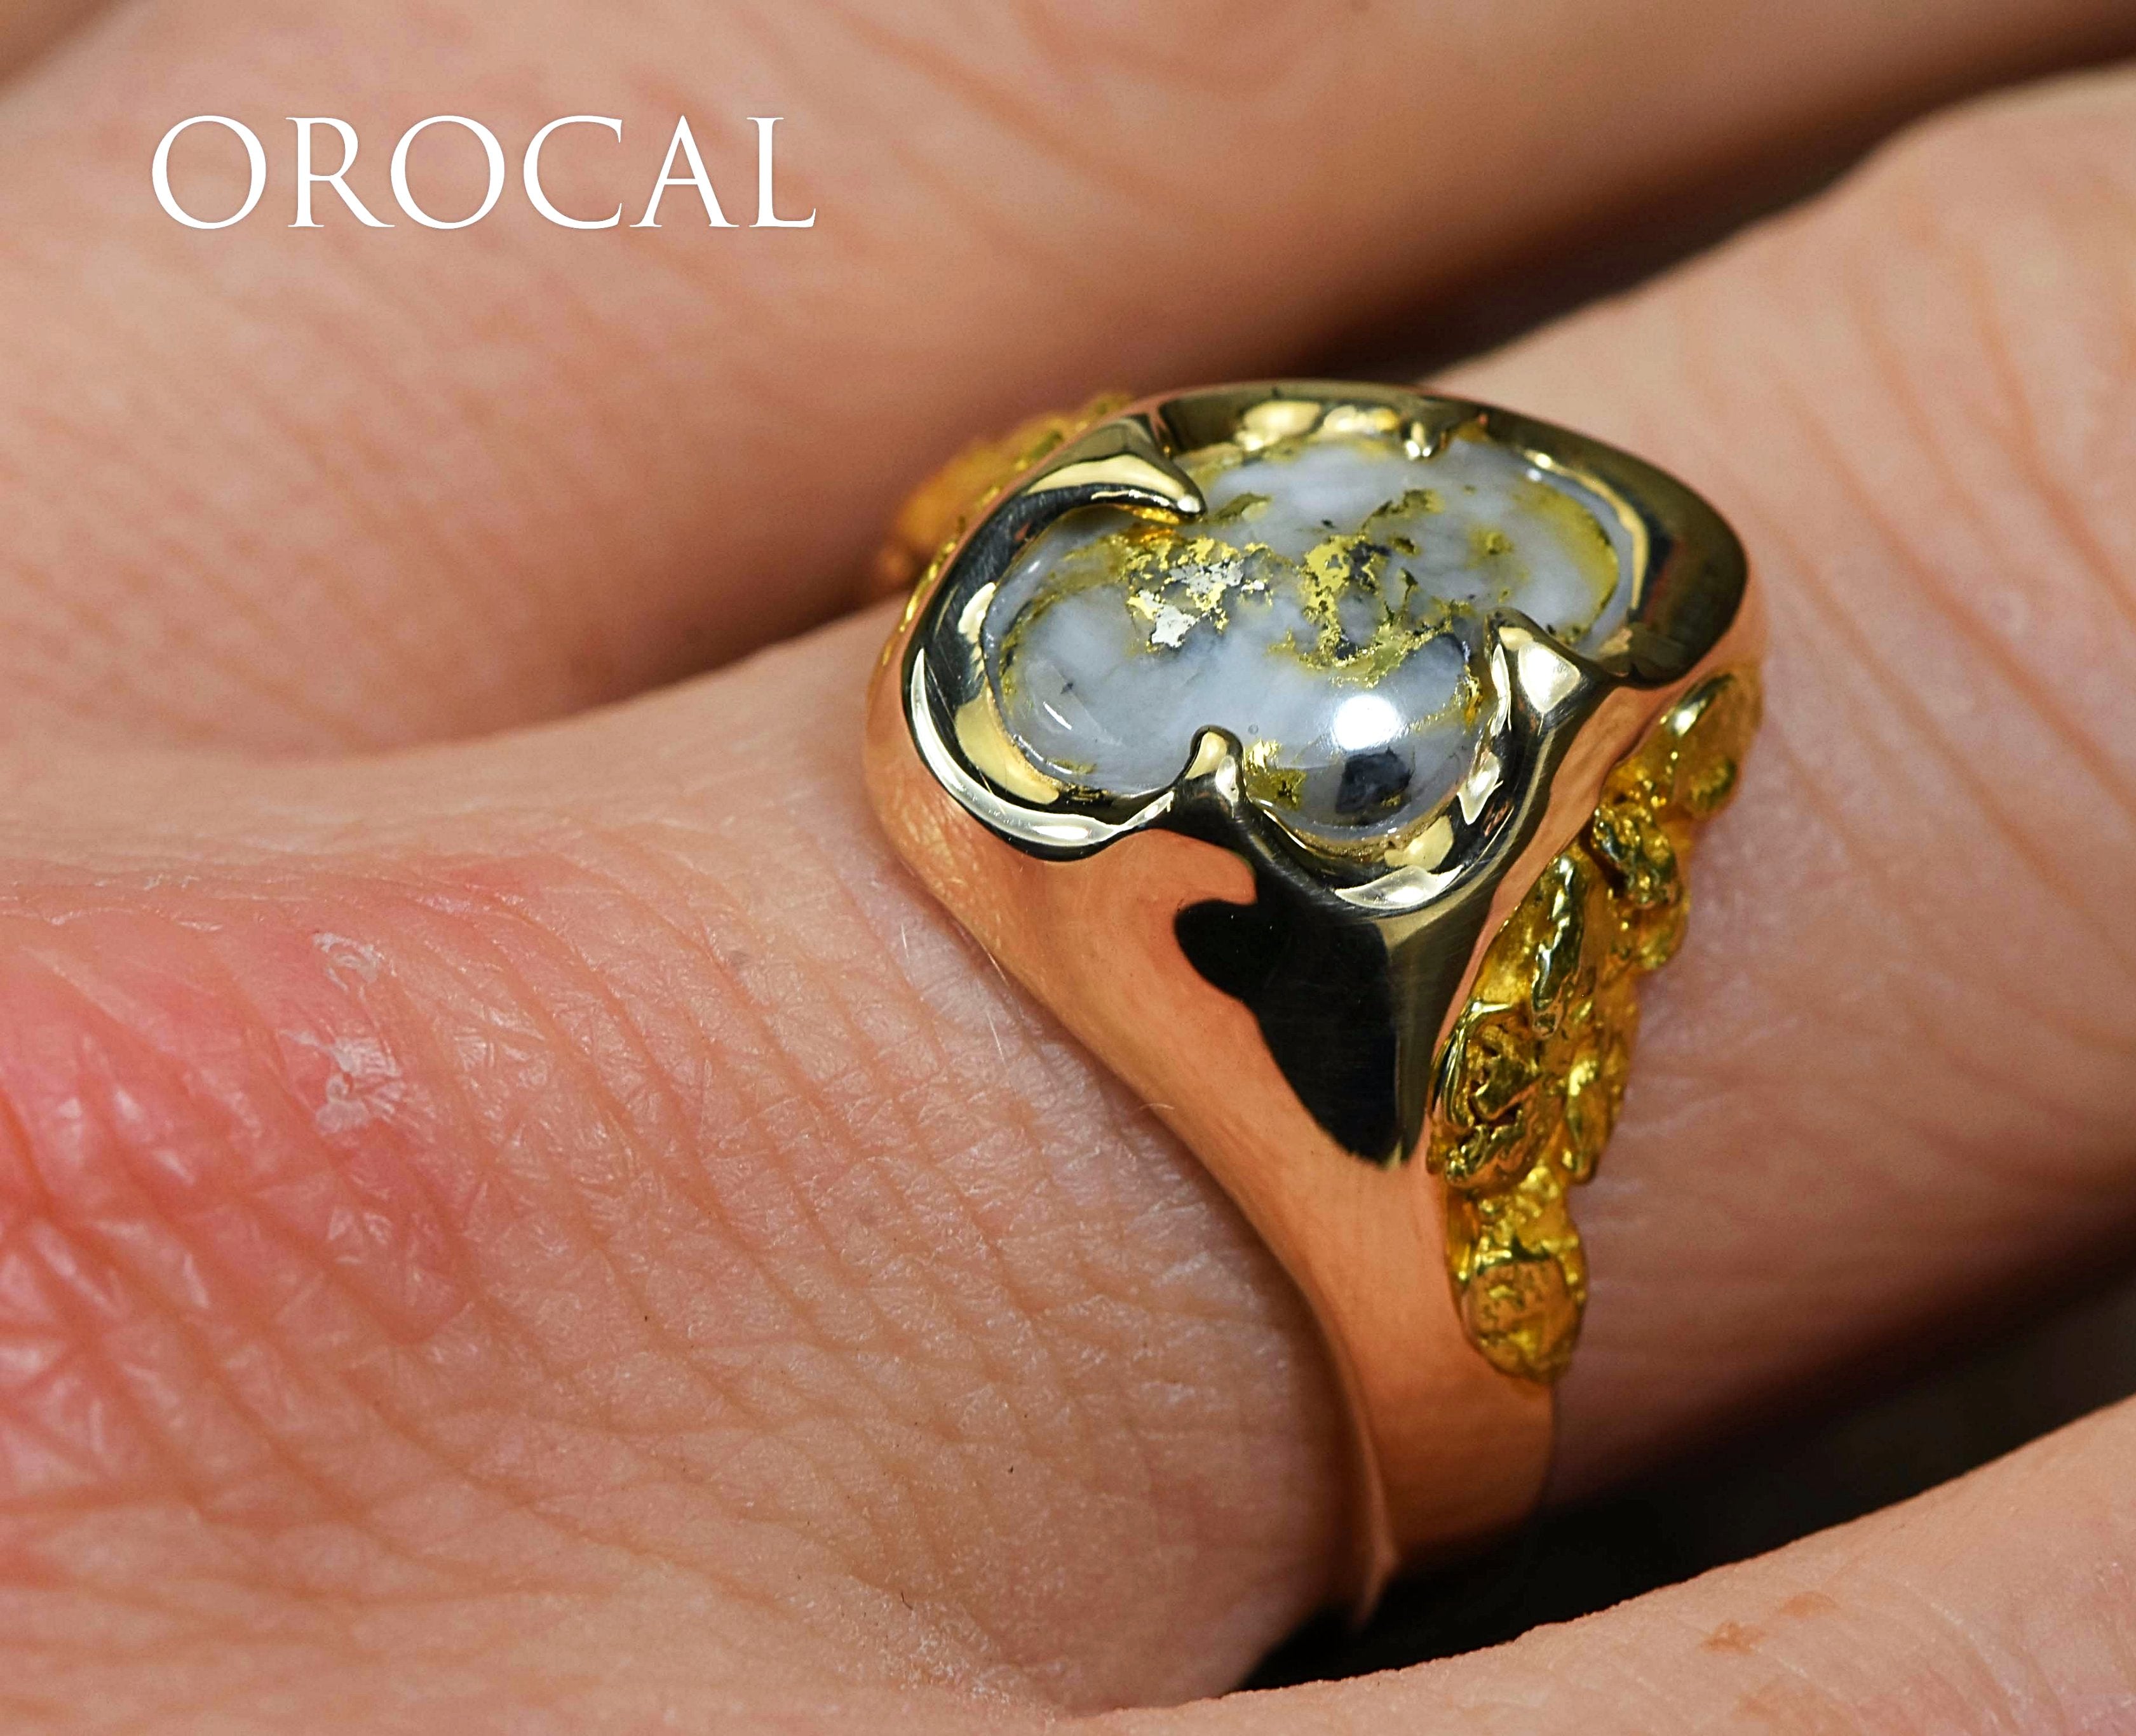 Gold Quartz Ring "Orocal" RMEQ109 Genuine Hand Crafted Jewelry - 14K Gold Casting